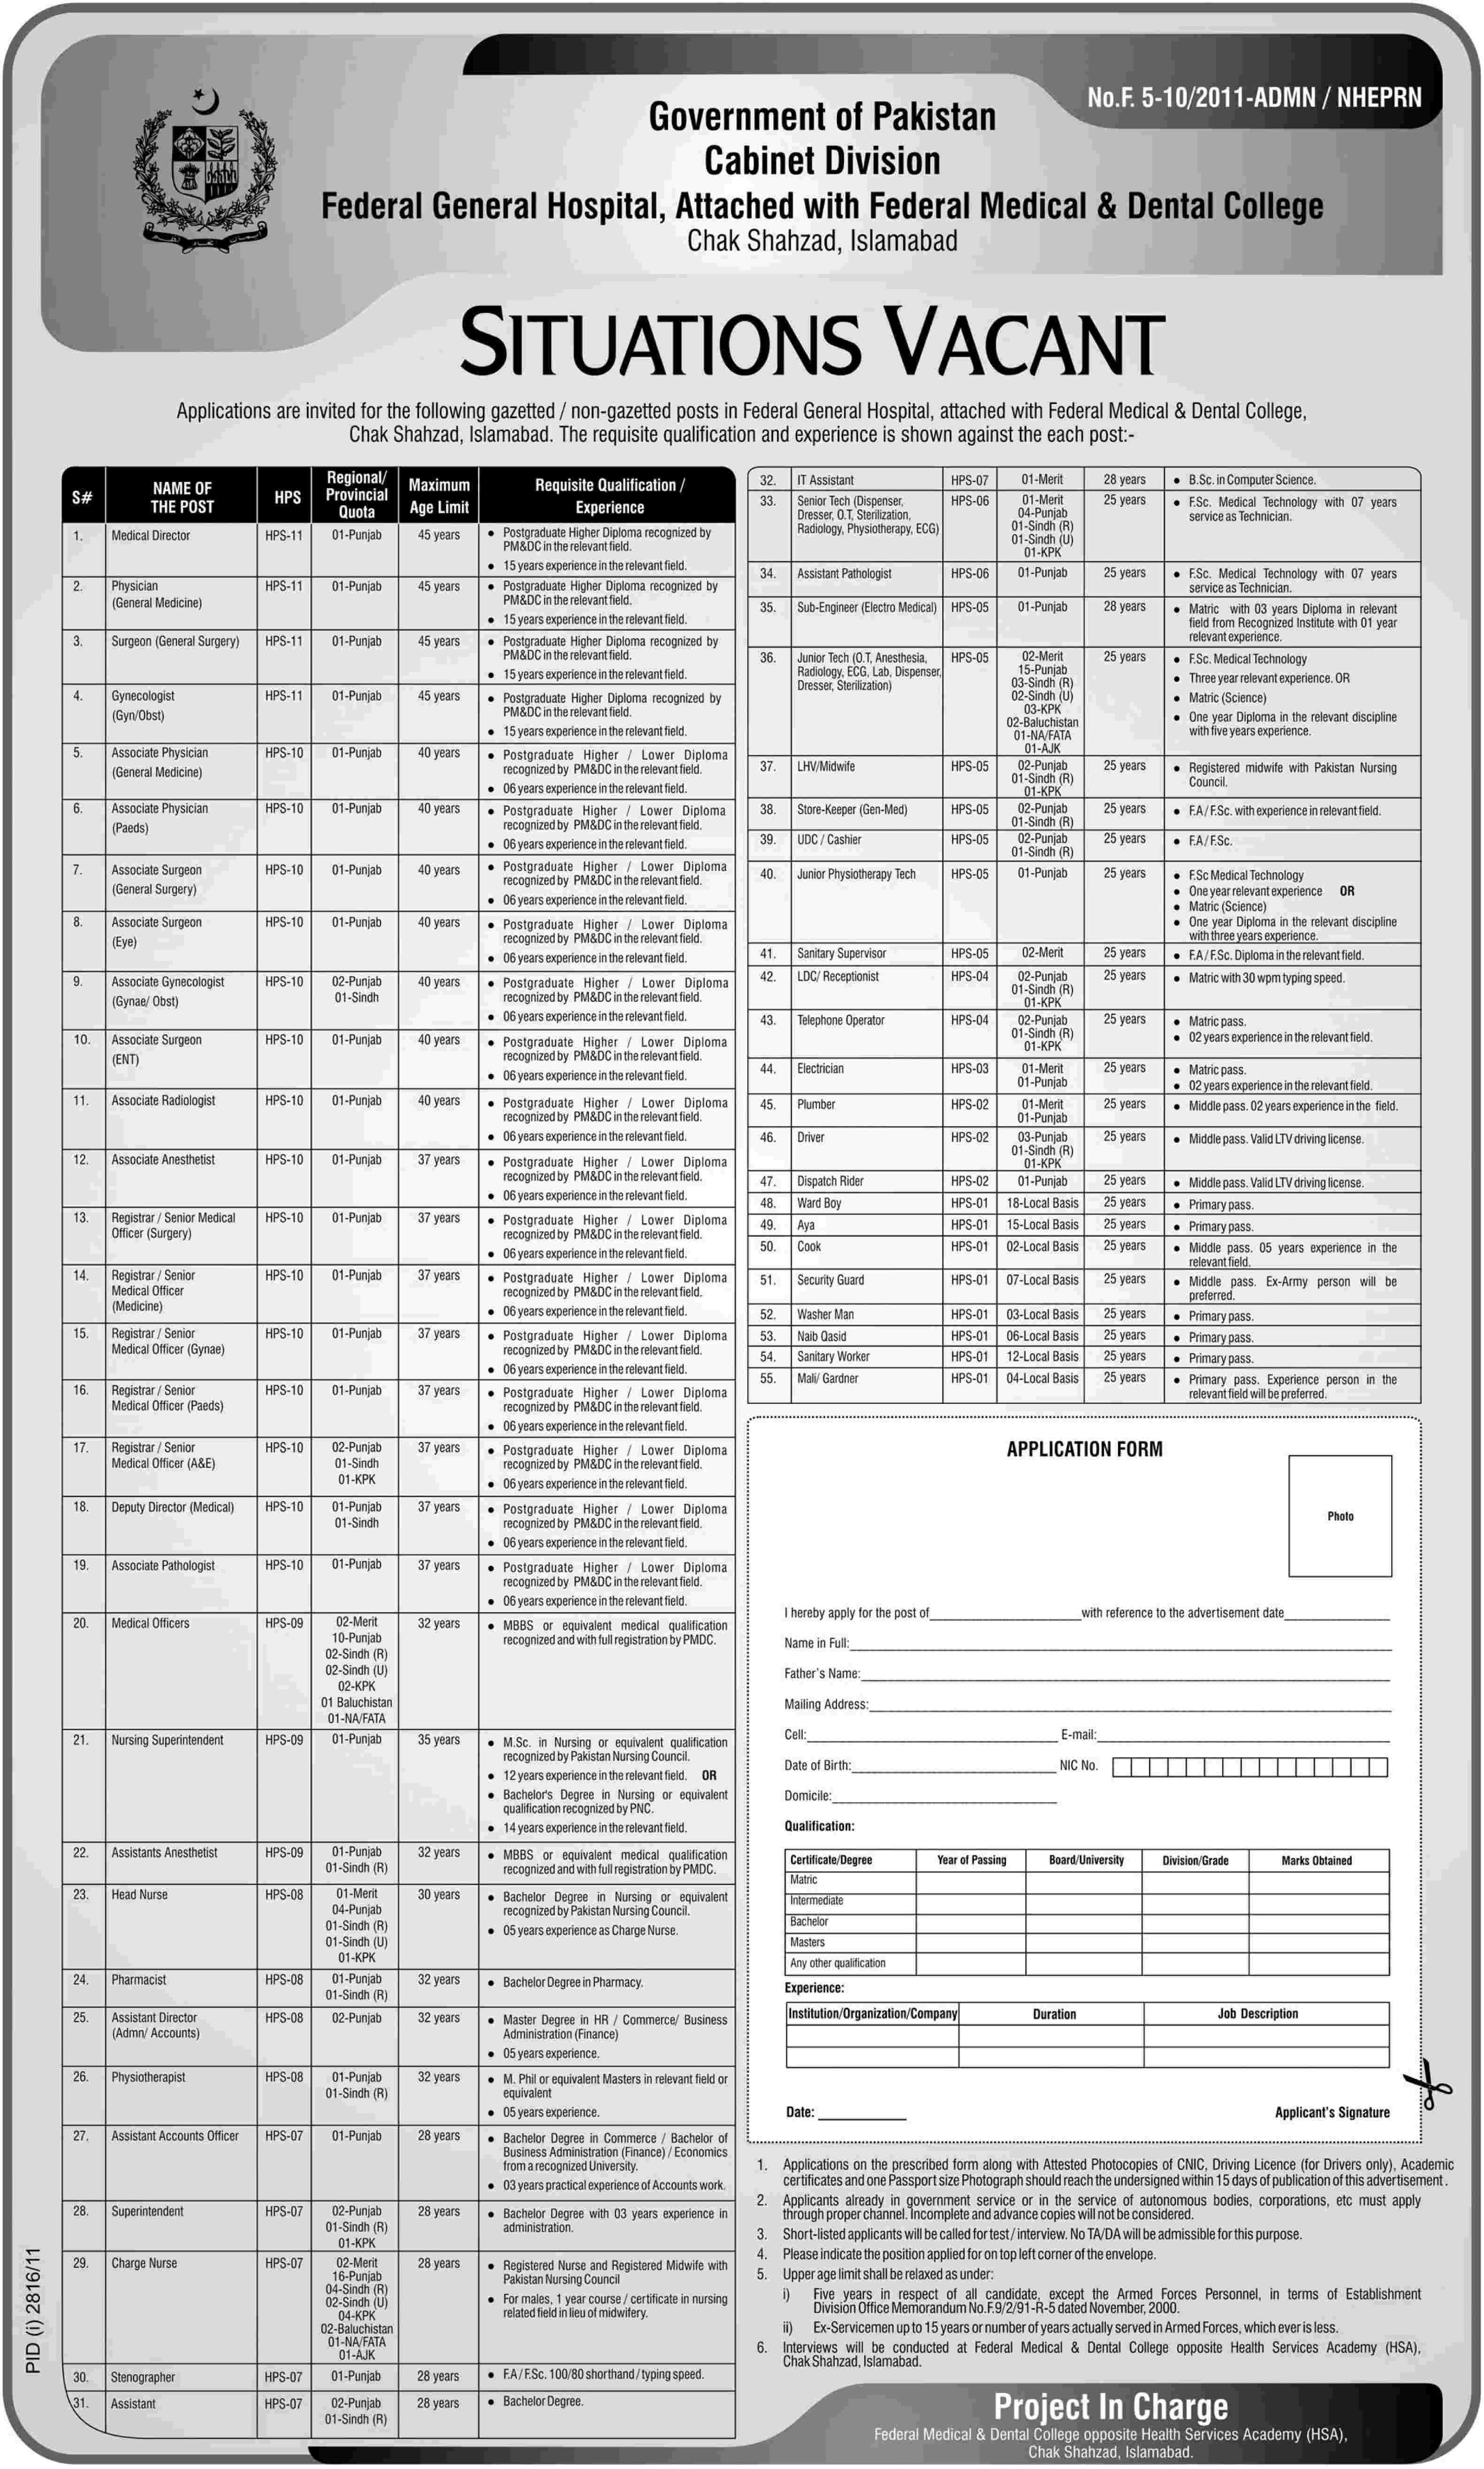 Government of Pakistan,Cabinet Division Federal General Hospital Islamabad Jobs Opportunities